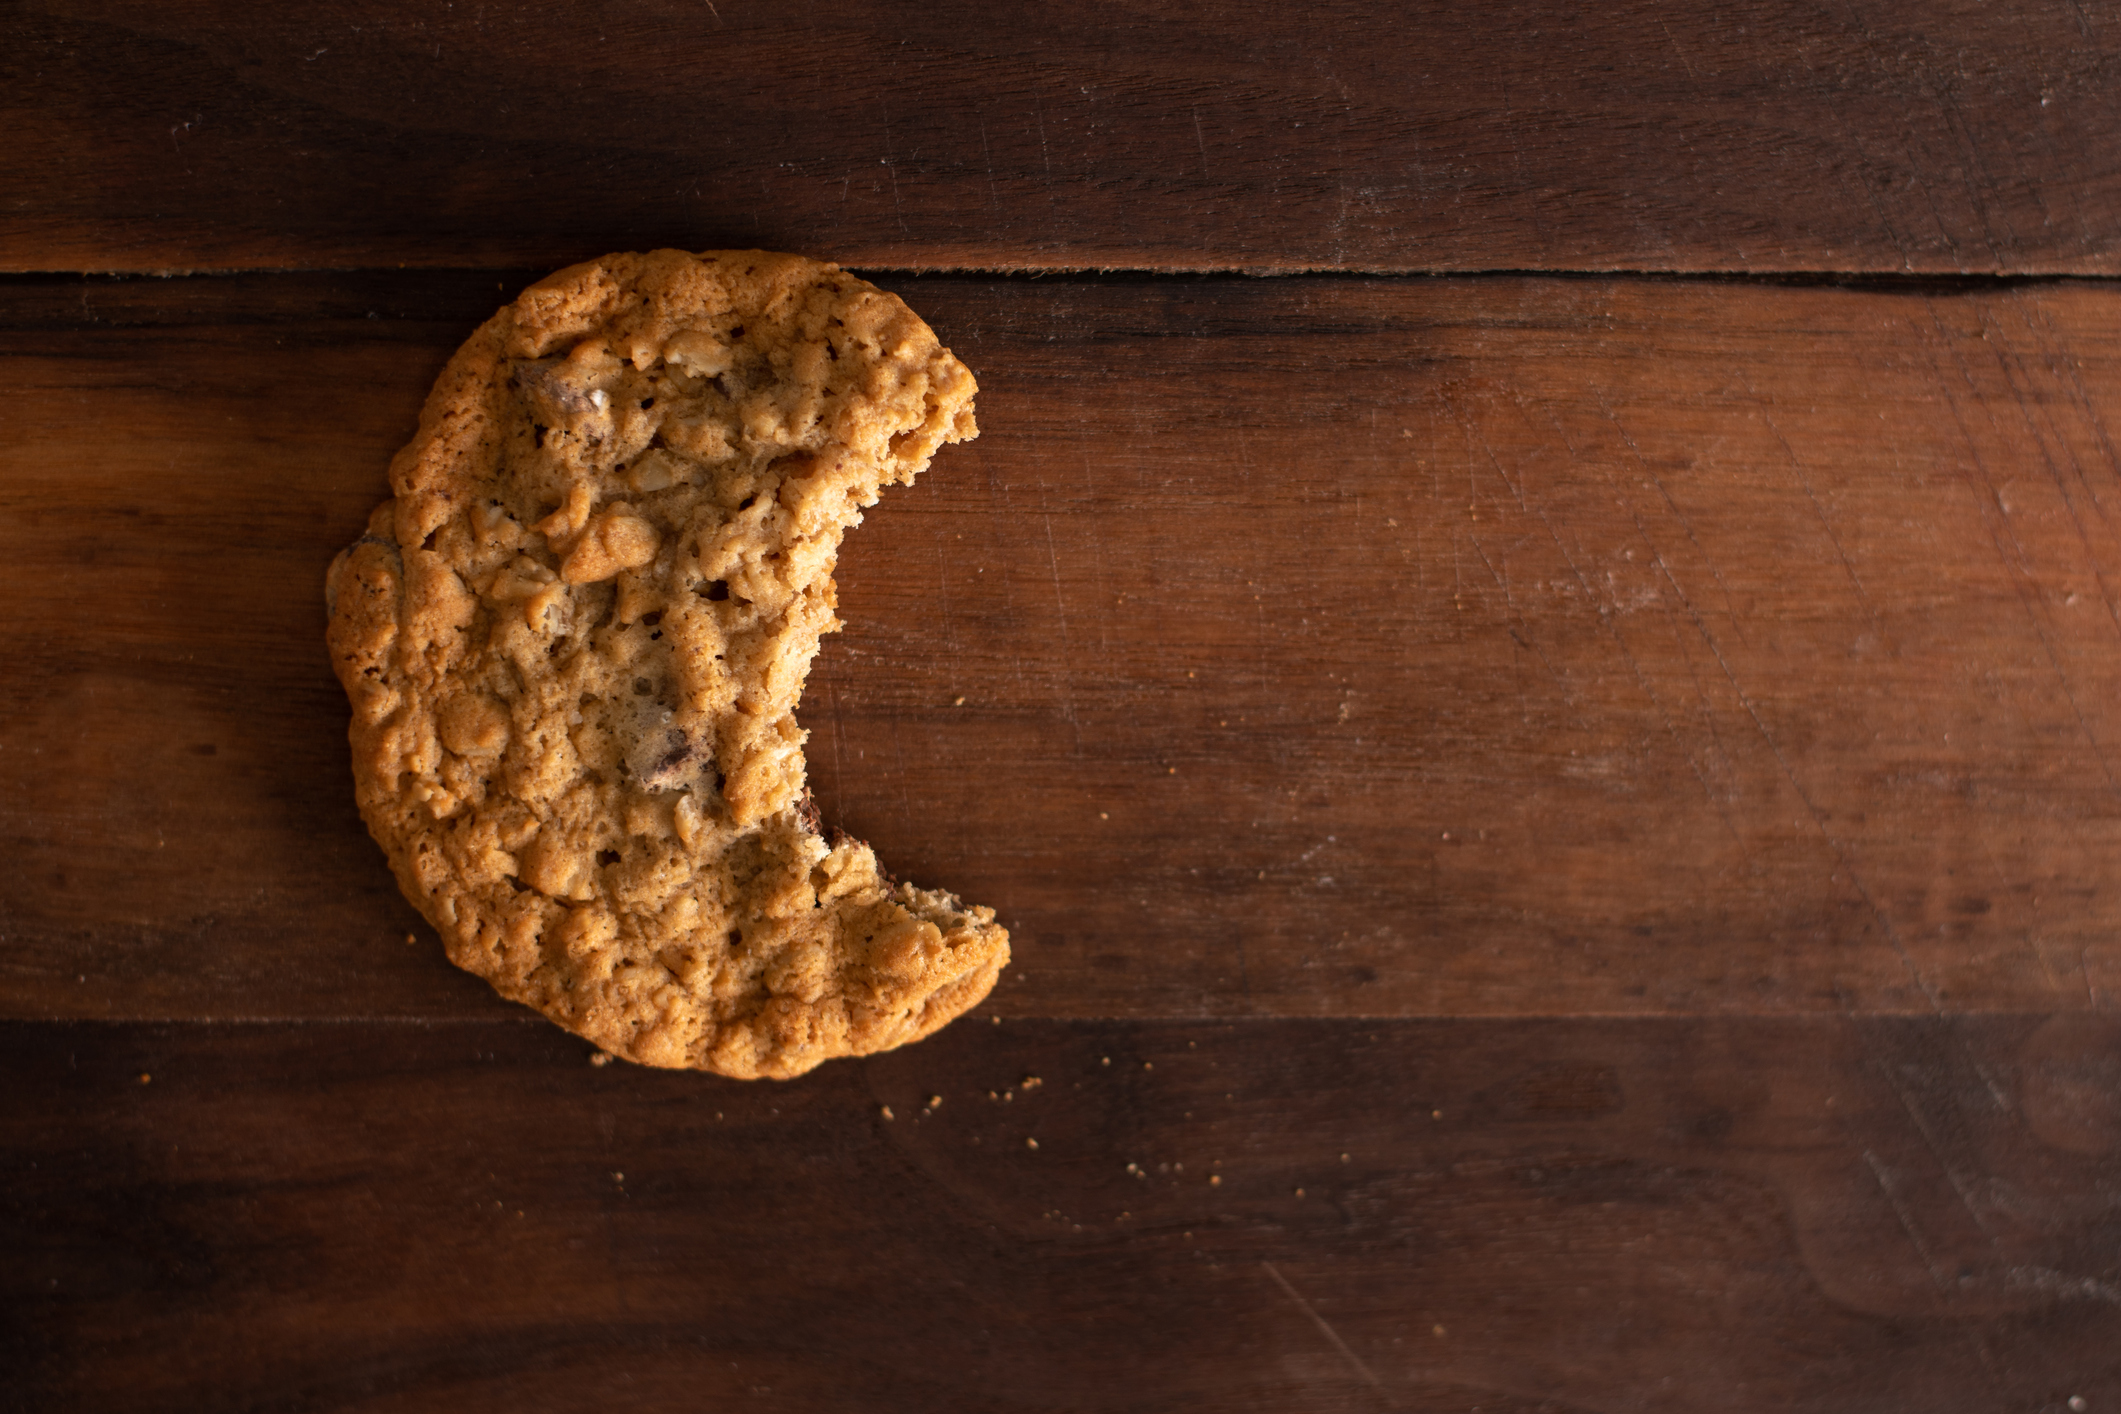 An oatmeal chocolate chip cookie with a bite out of it on a walnut wood board.